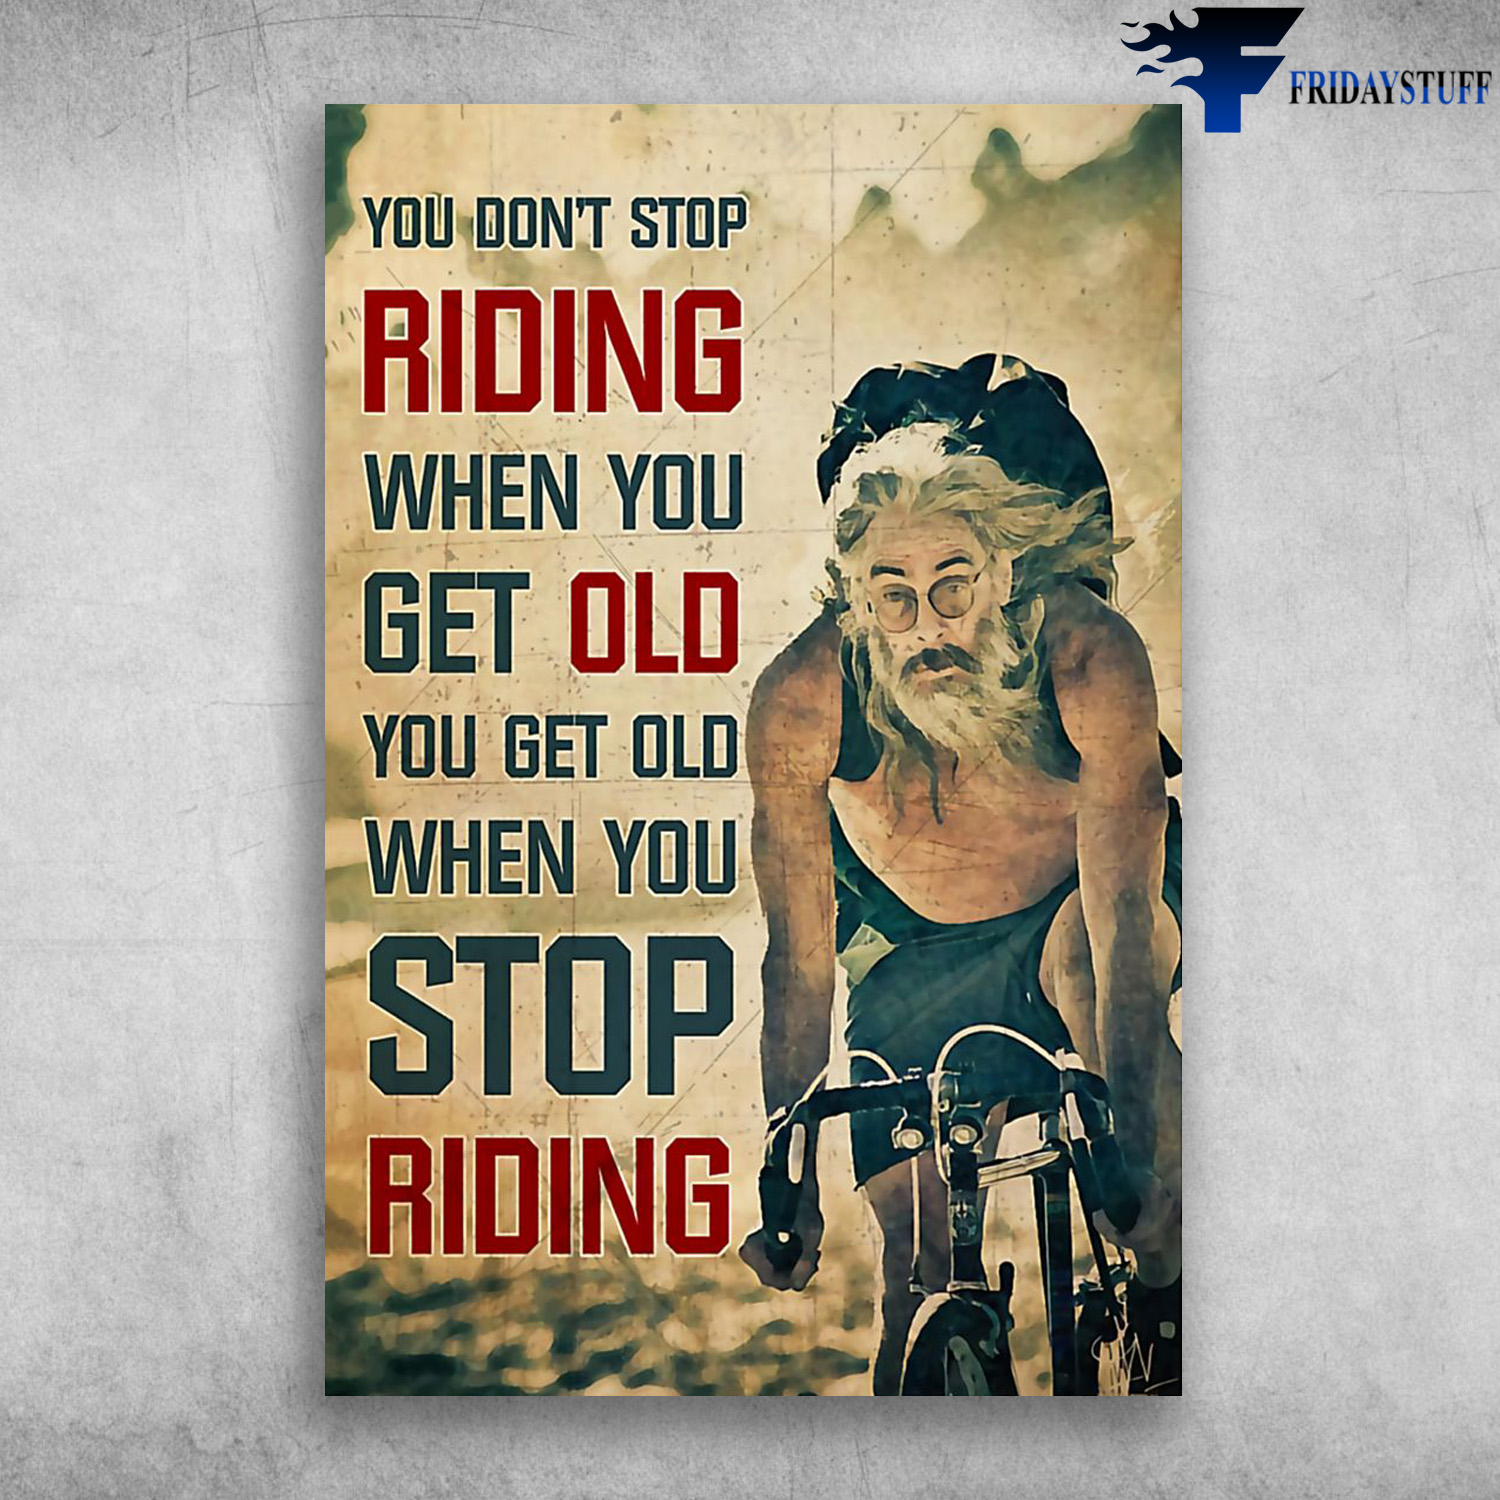 Old Man Riding Bikecycle - You Don't Stop Riding When You Get Old, You Get Old When You Stop Riding